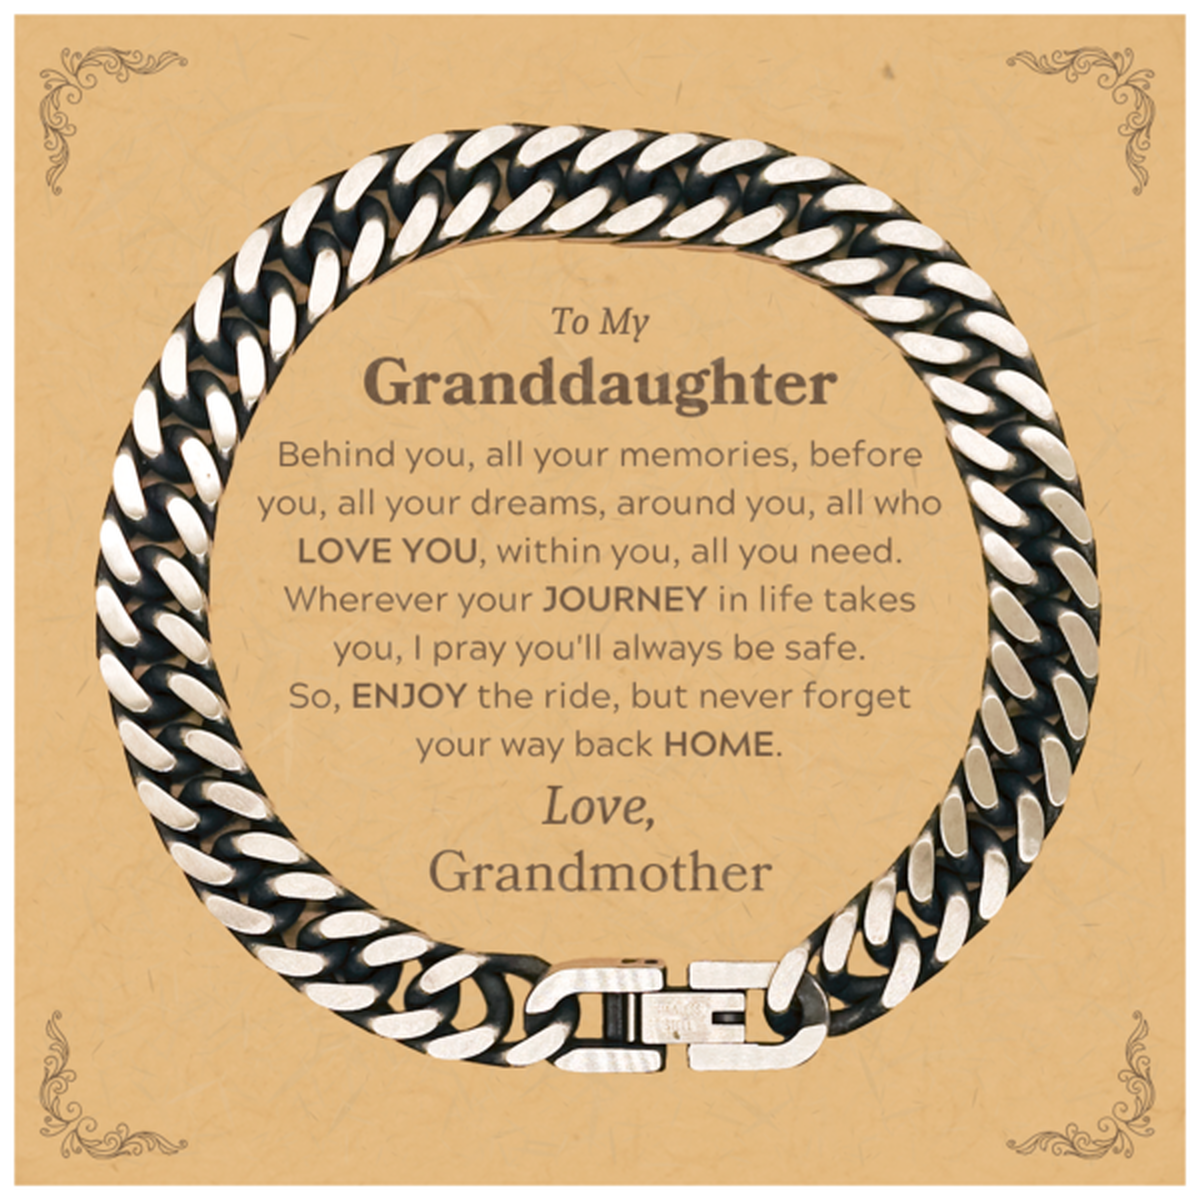 To My Granddaughter Graduation Gifts from Grandmother, Granddaughter Cuban Link Chain Bracelet Christmas Birthday Gifts for Granddaughter Behind you, all your memories, before you, all your dreams. Love, Grandmother